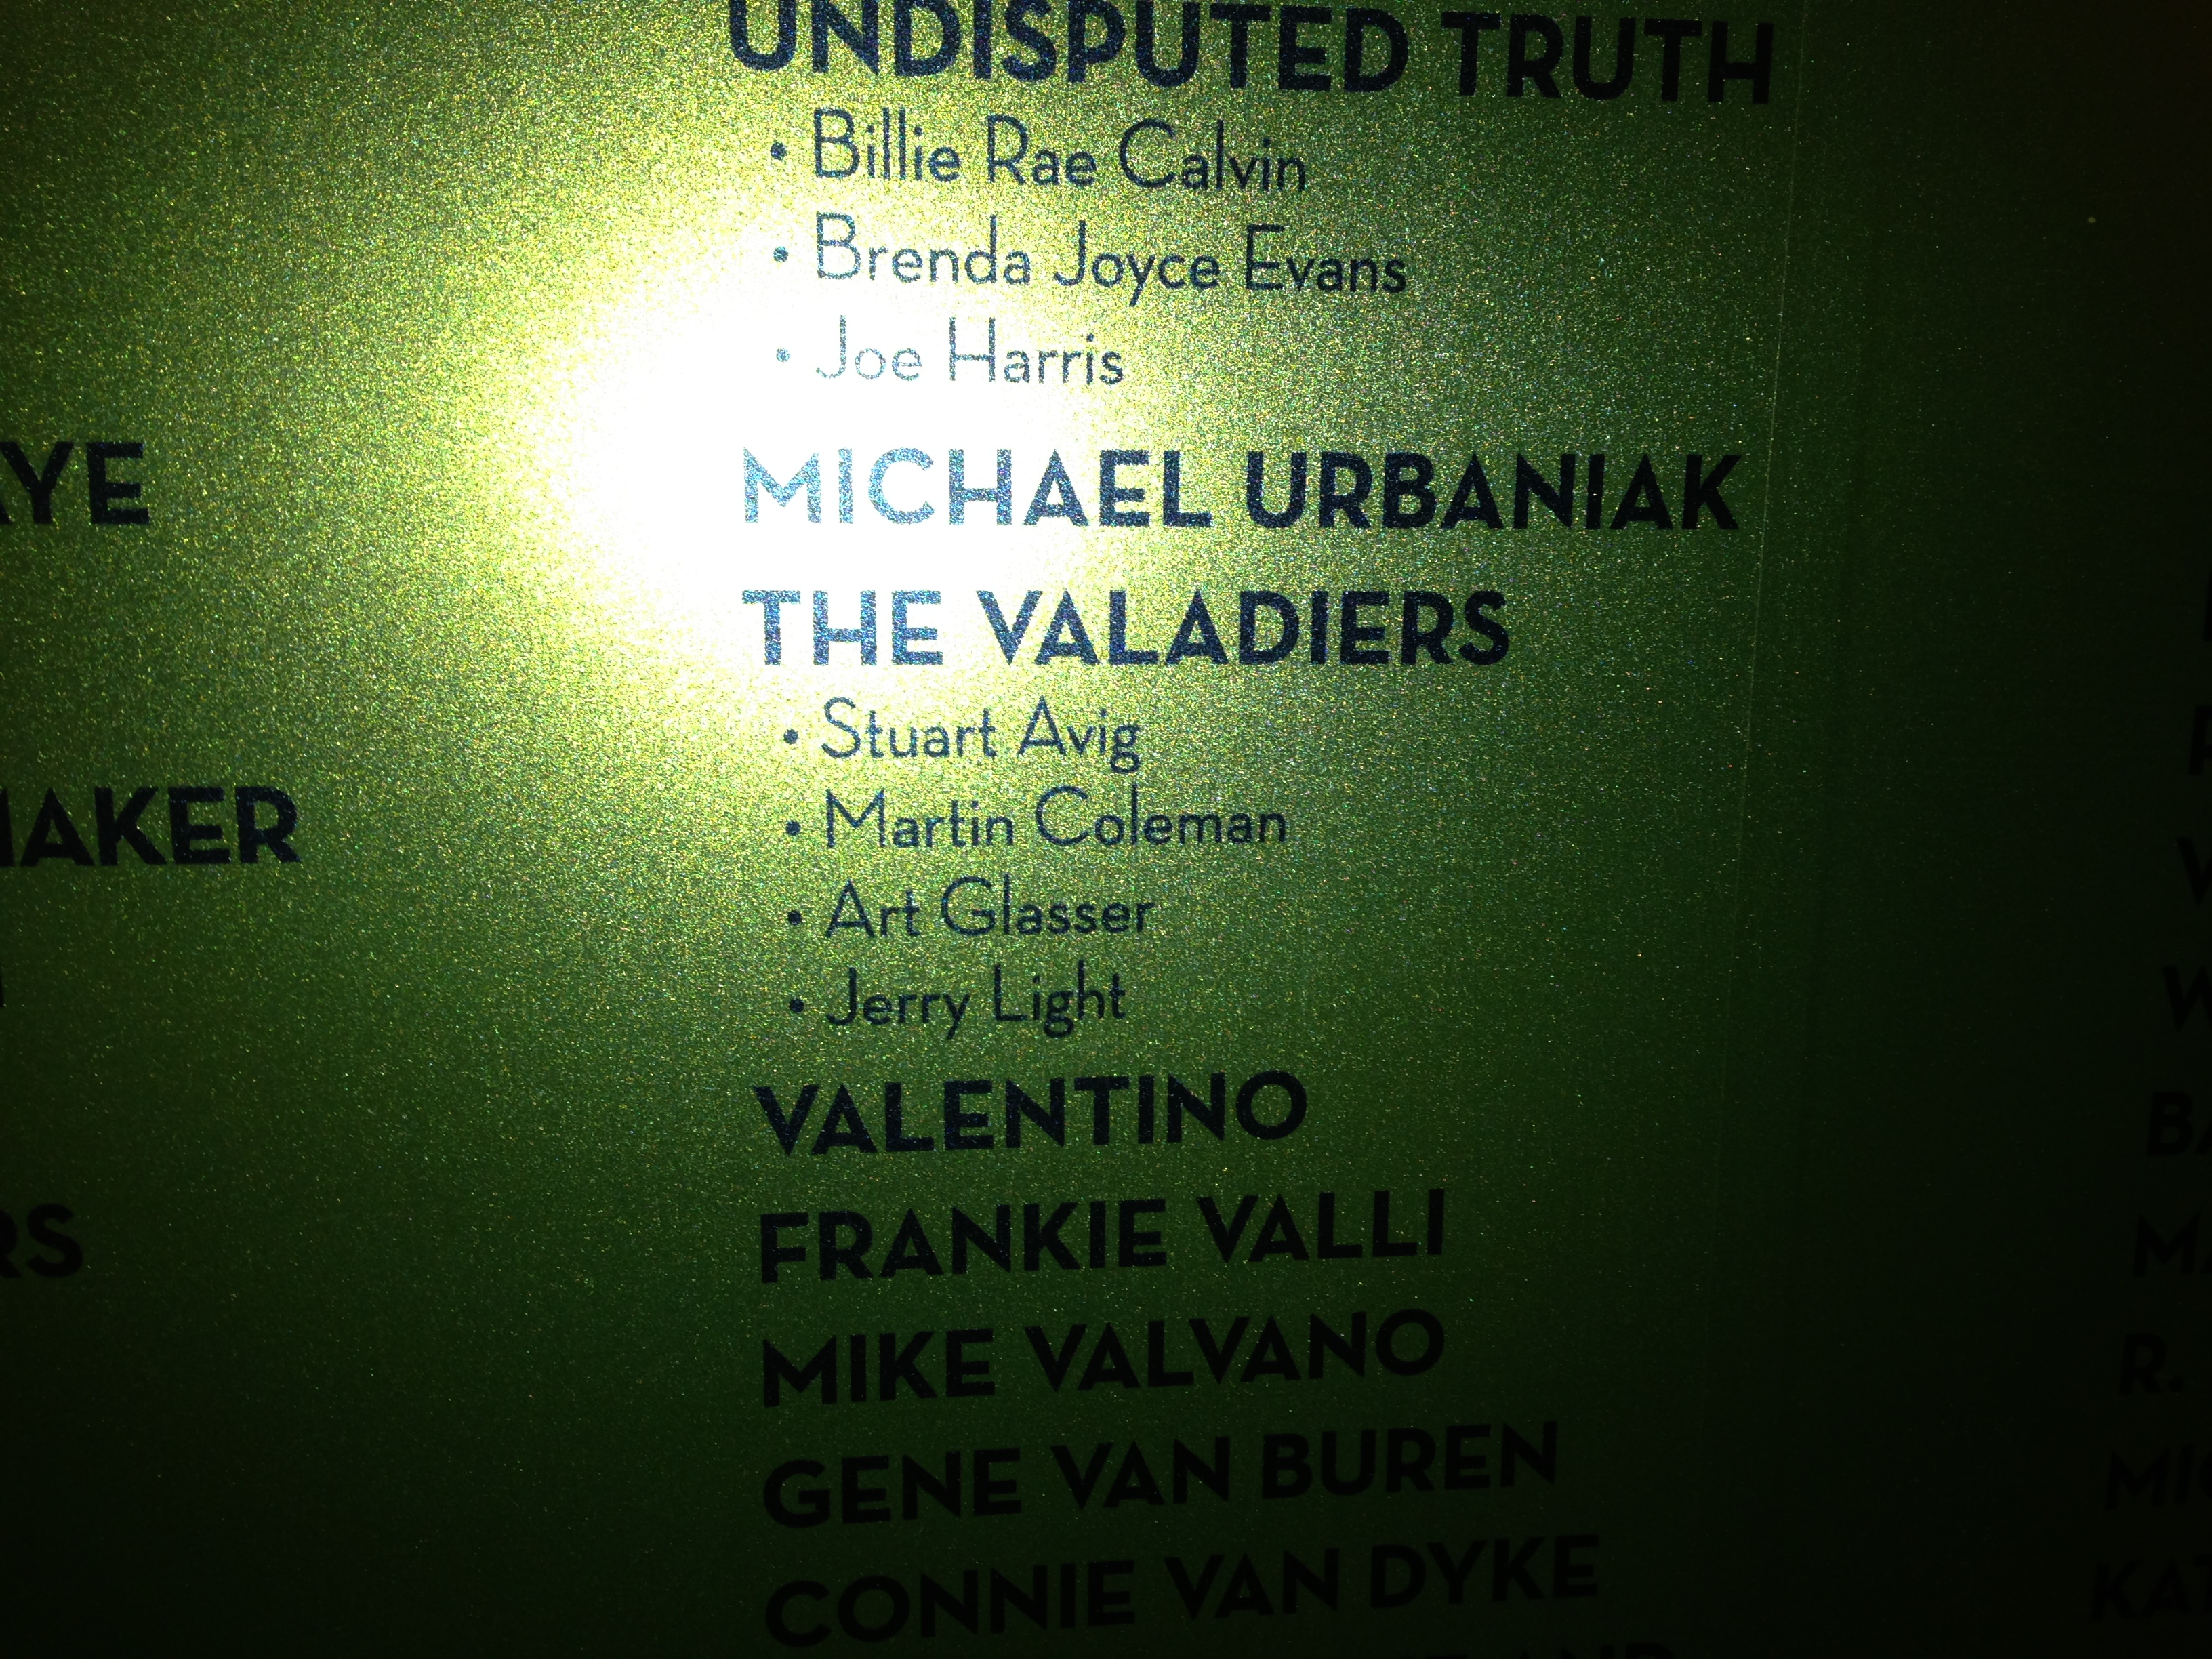 Motown Hall of Fame - The Valadiers